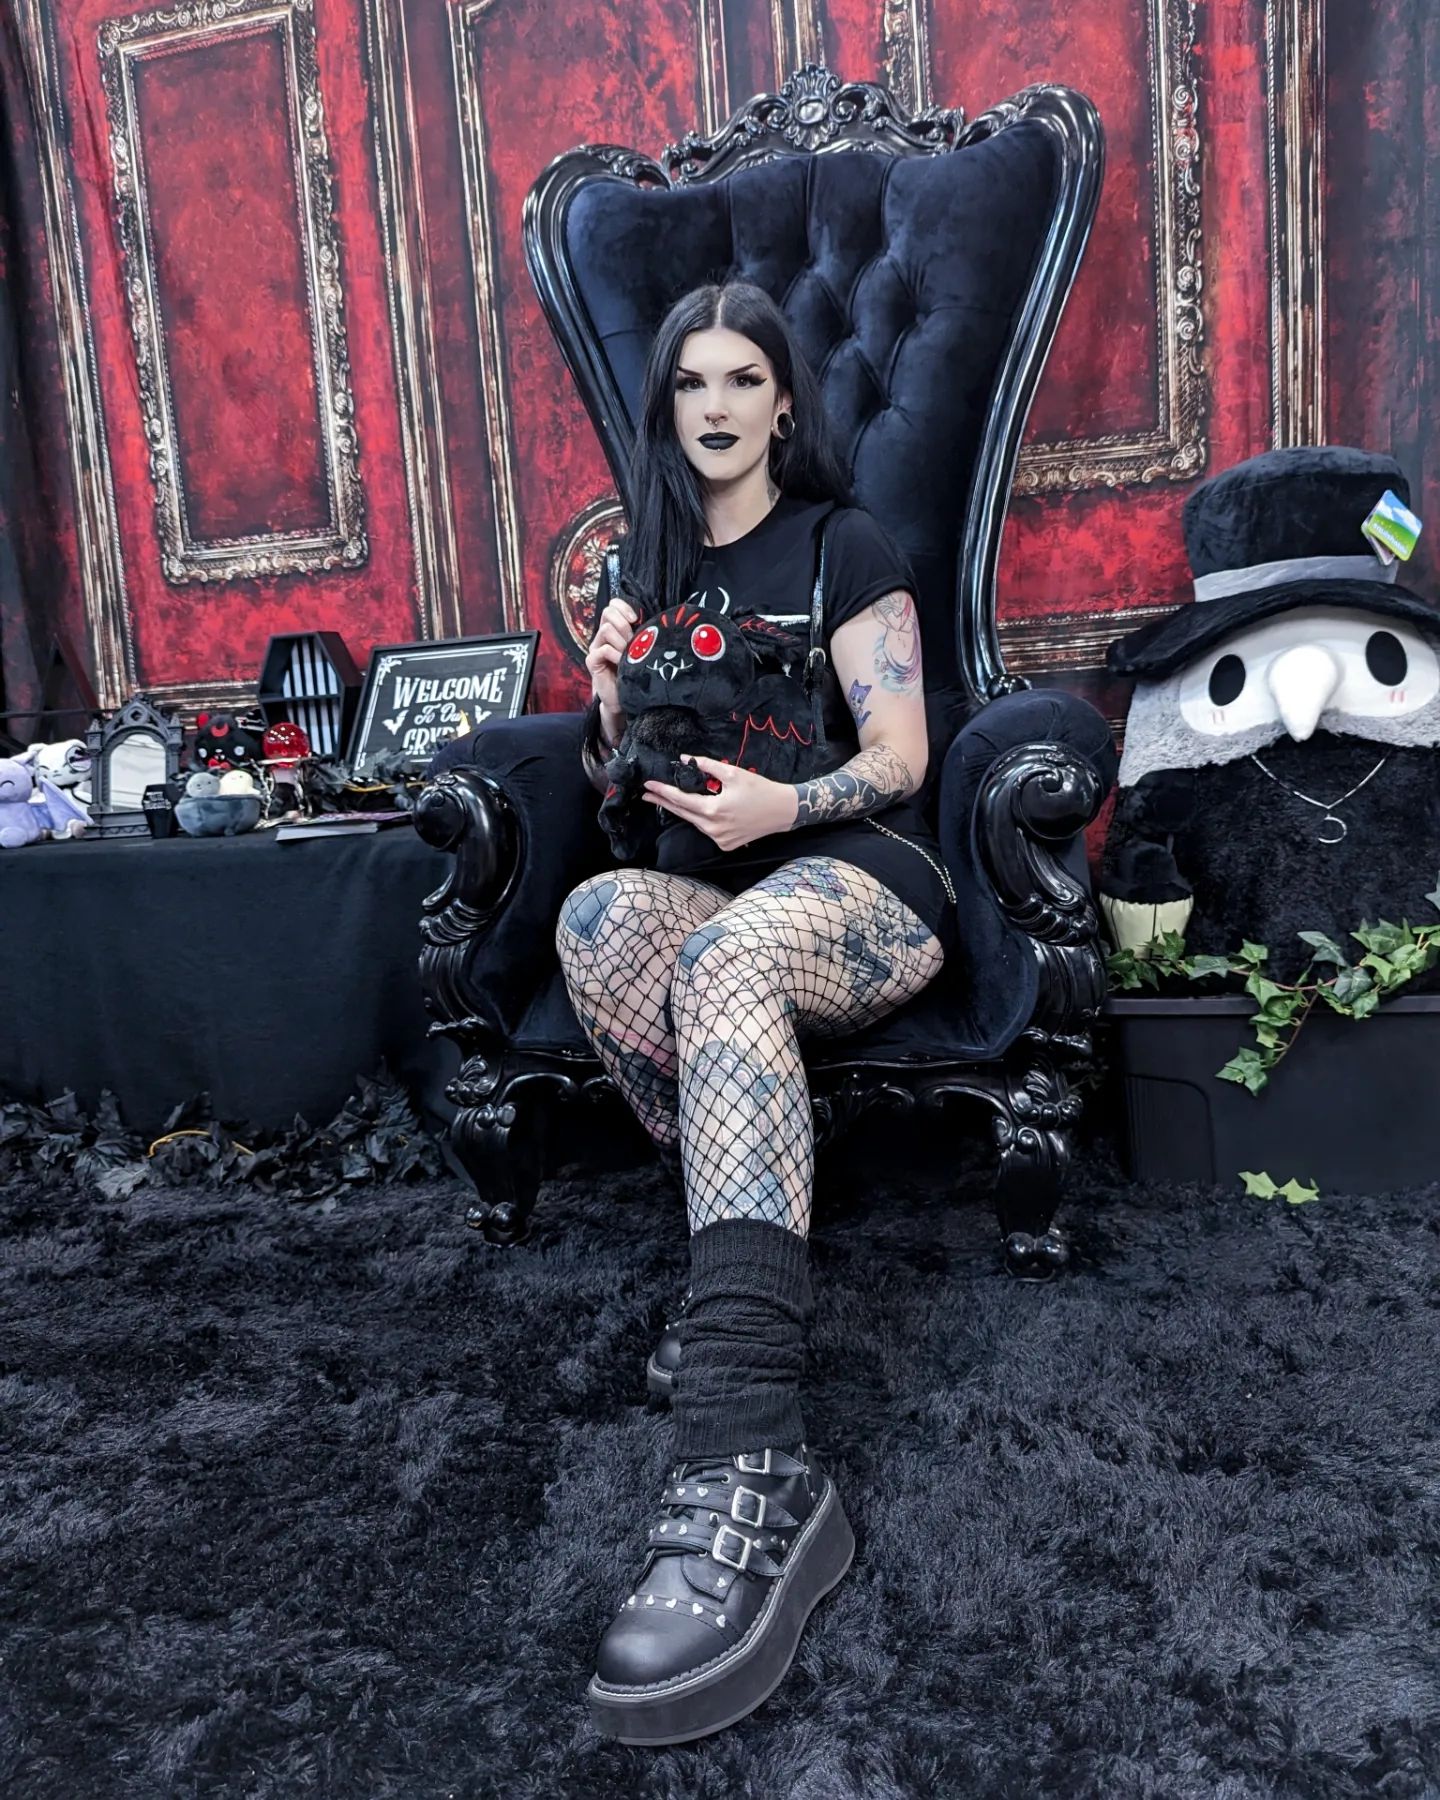 Honestly had such an amazing weekend at @odditiesandcuriositiesexpo with so many amazing people 🖤

I've been super sick and not online much lately so it was a nice refreshing weekend 🤍🤍

#beserkoddities2023 #altfashion #alternativefashion #spooky #gothgirl #demonia #cadaverapparel